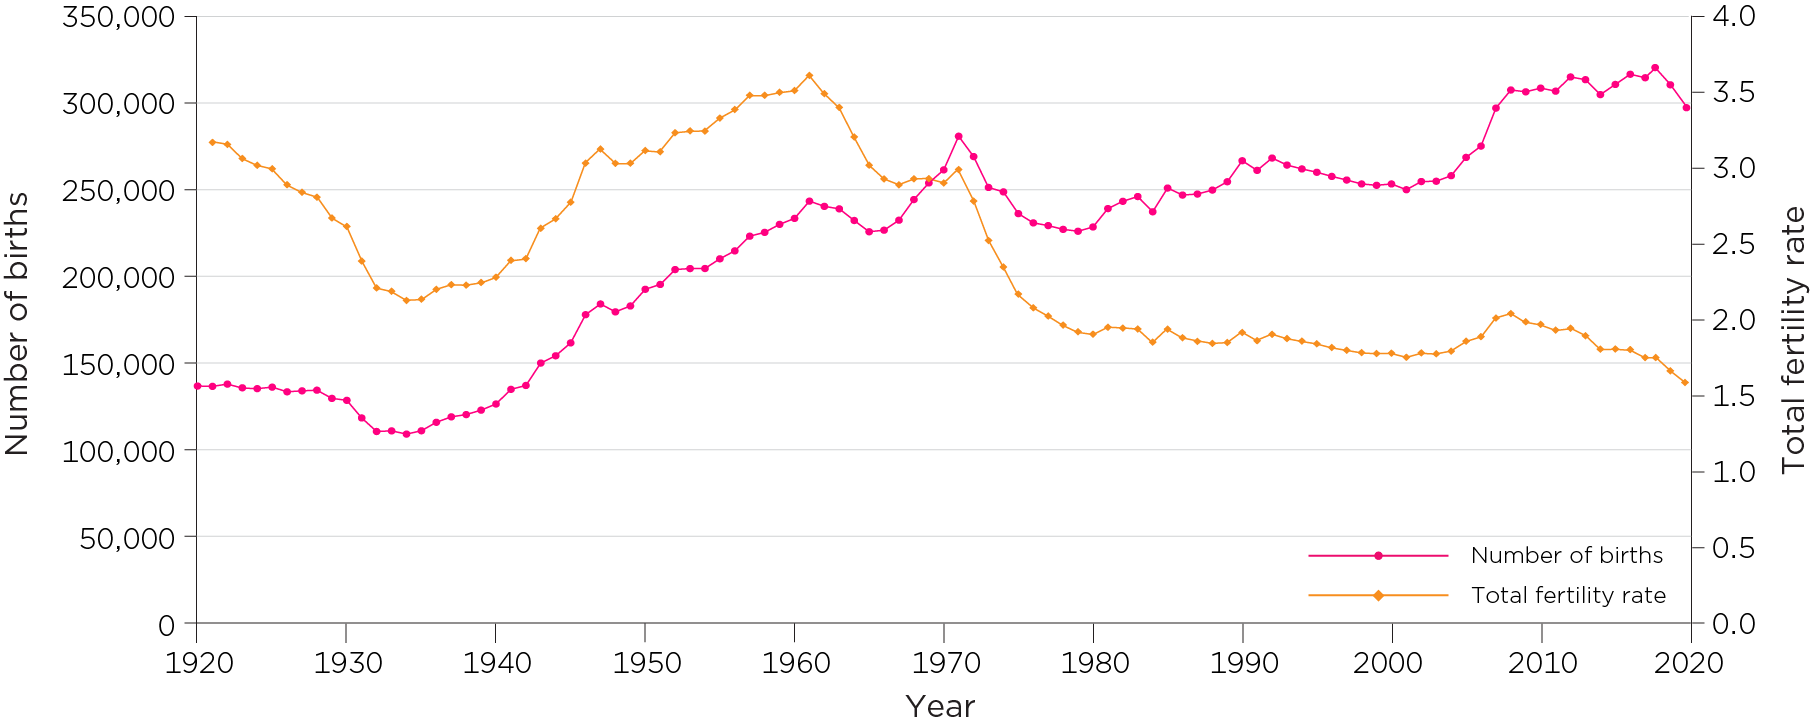 Figure 1: Number of births and total fertility rate, 1921–2020.